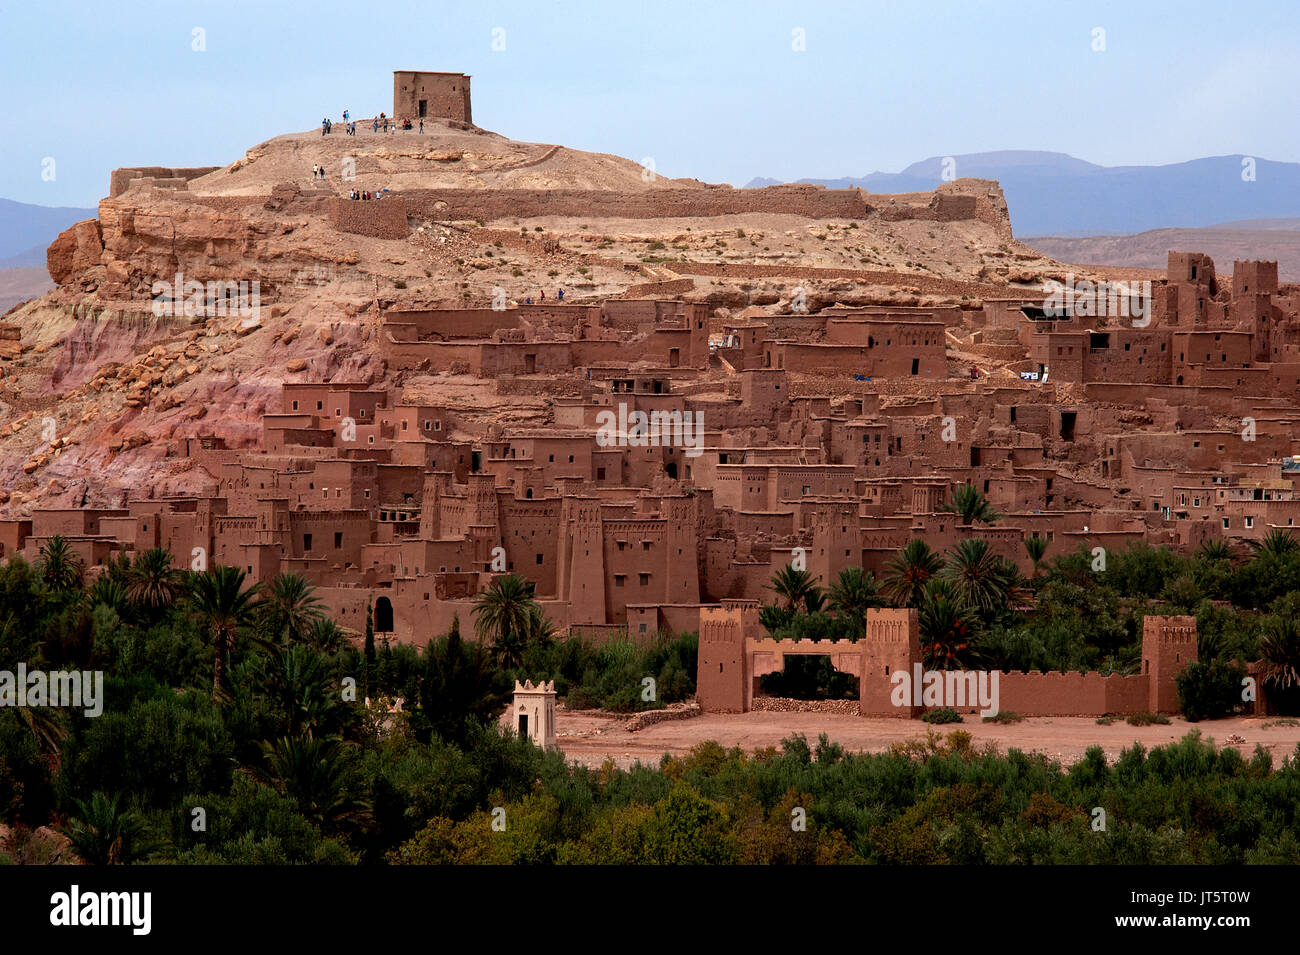 The fortified town of Ait Benhaddou in Morocco's arid Atlas Mountains. With its unique earthen-clay architecture it is a UNESCO world heritage site. Stock Photo